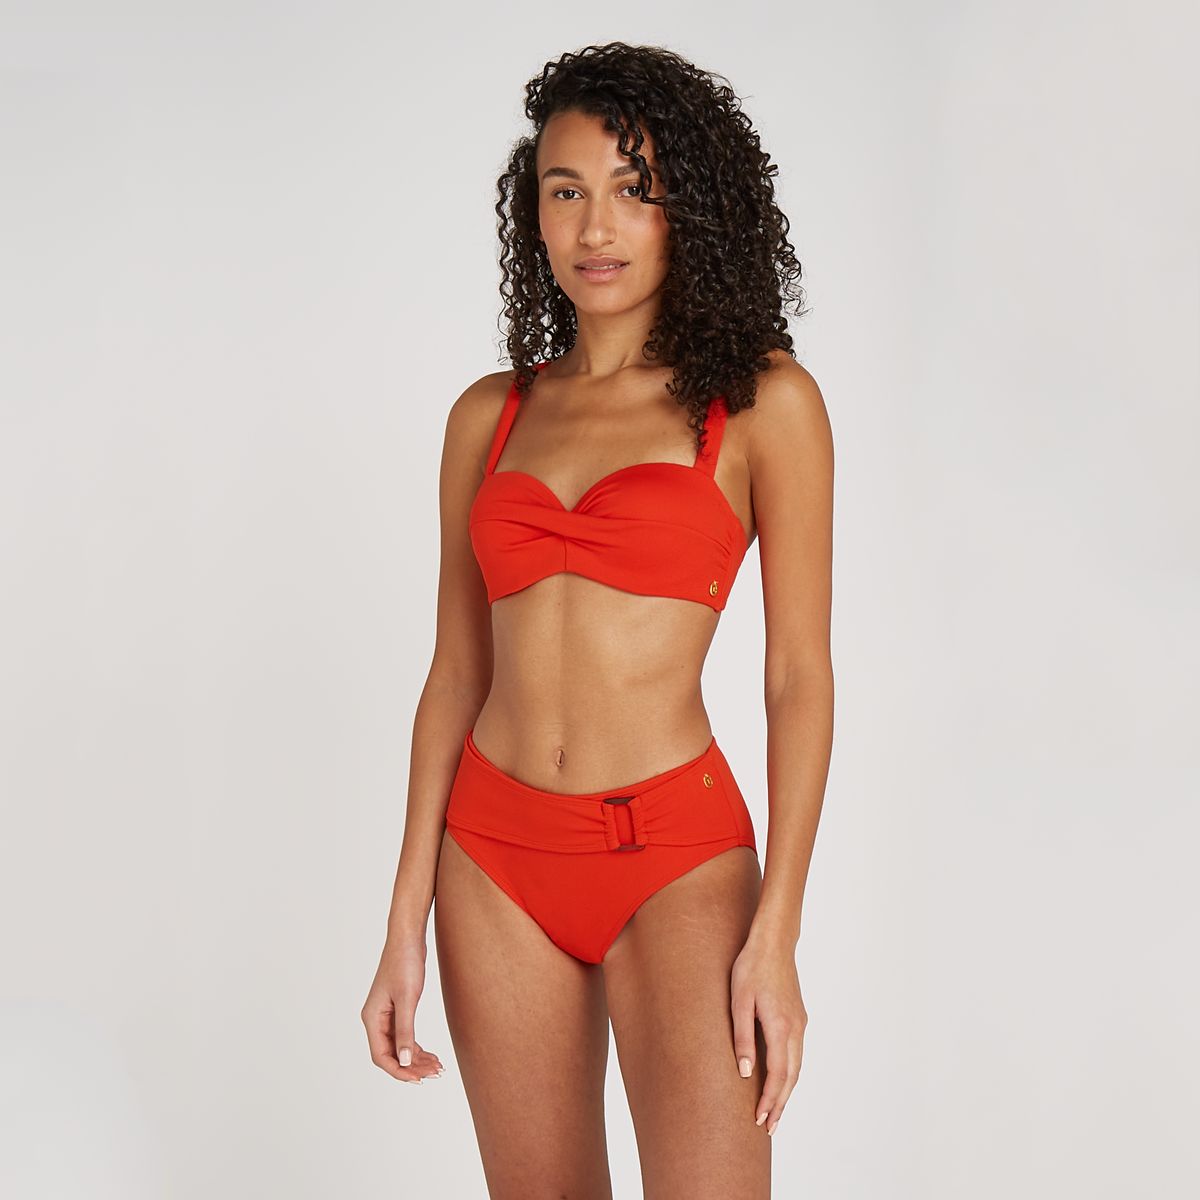 Twisted bikini top summer red relief